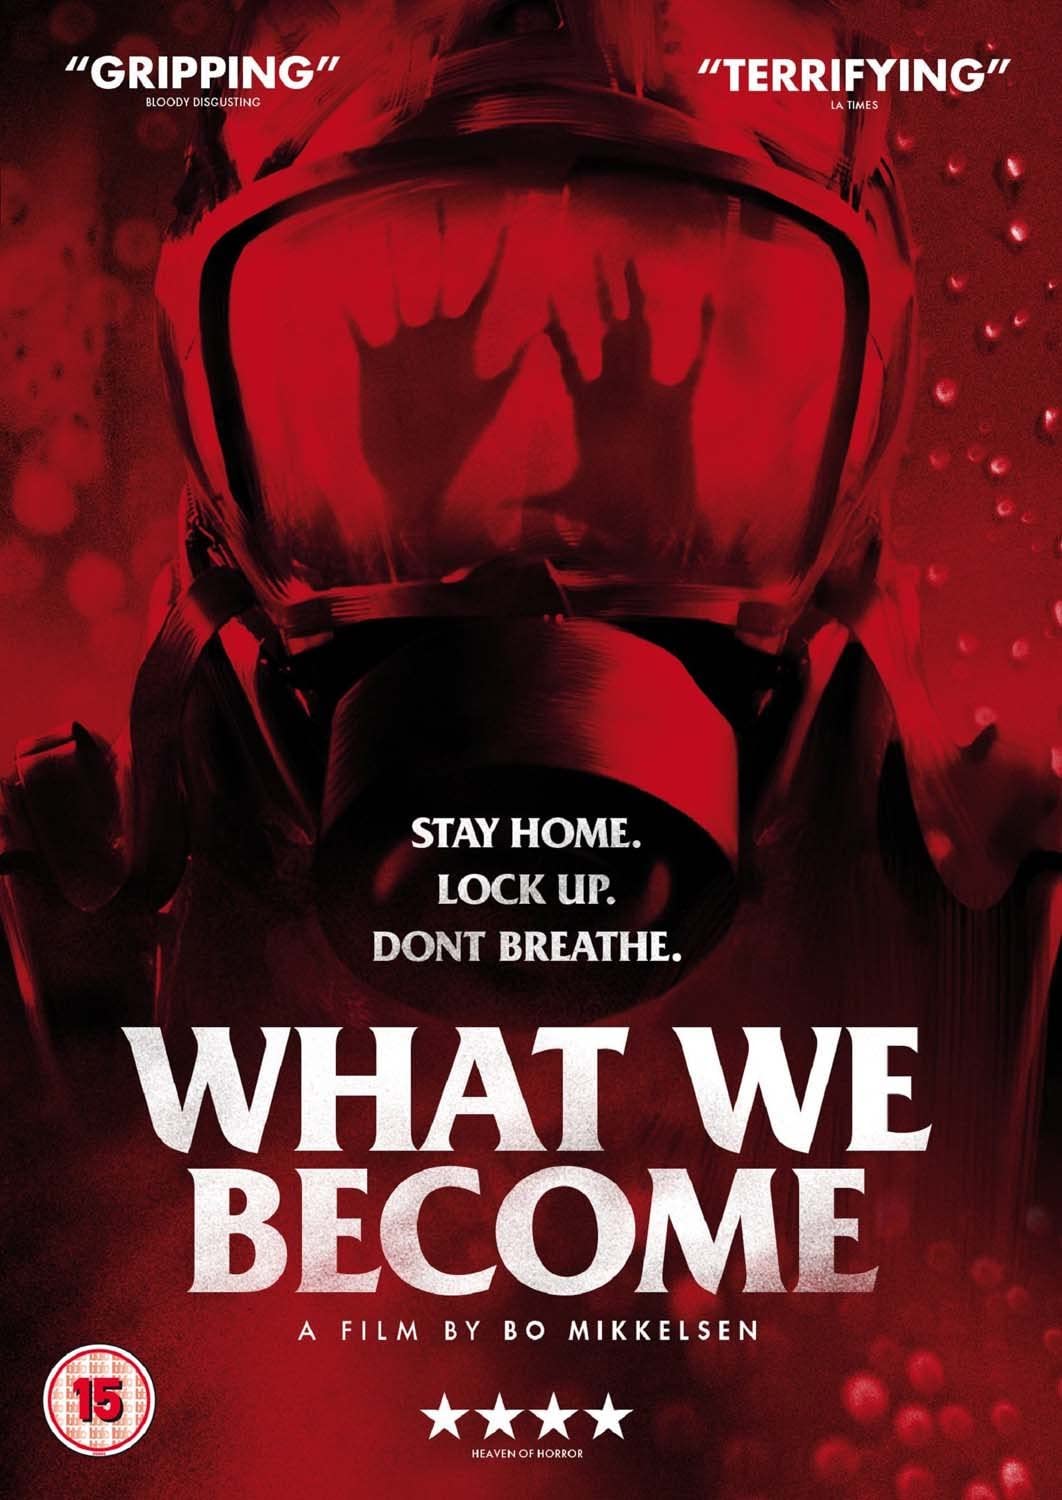 What We Become [2016] - Horror/Thriller [DVD]